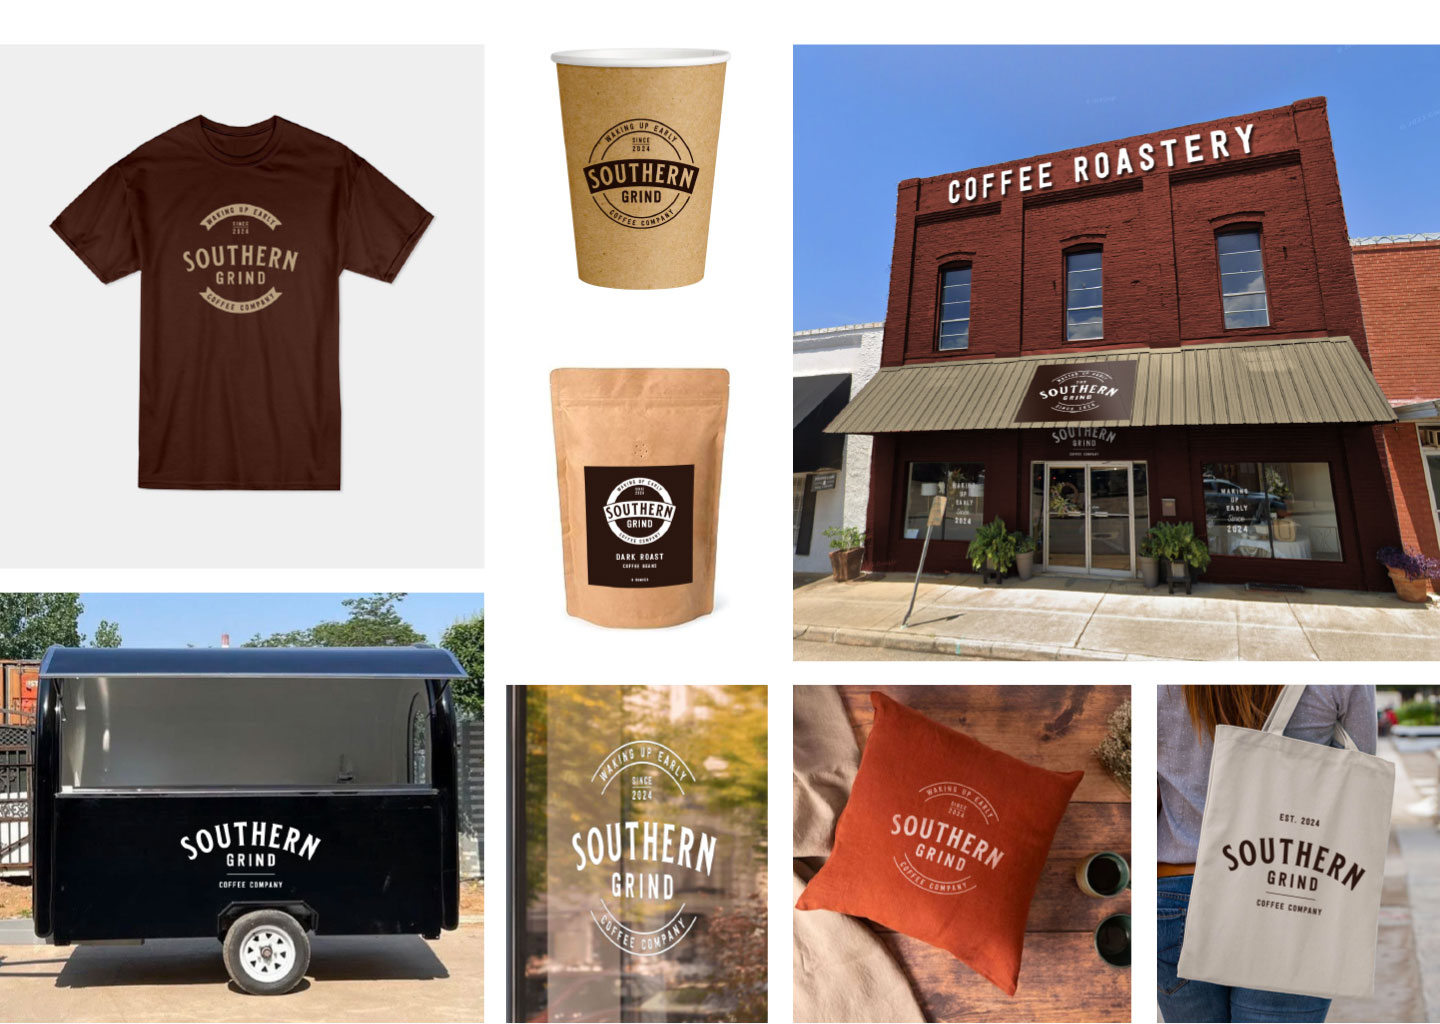 The Southern Grind Identity mockups